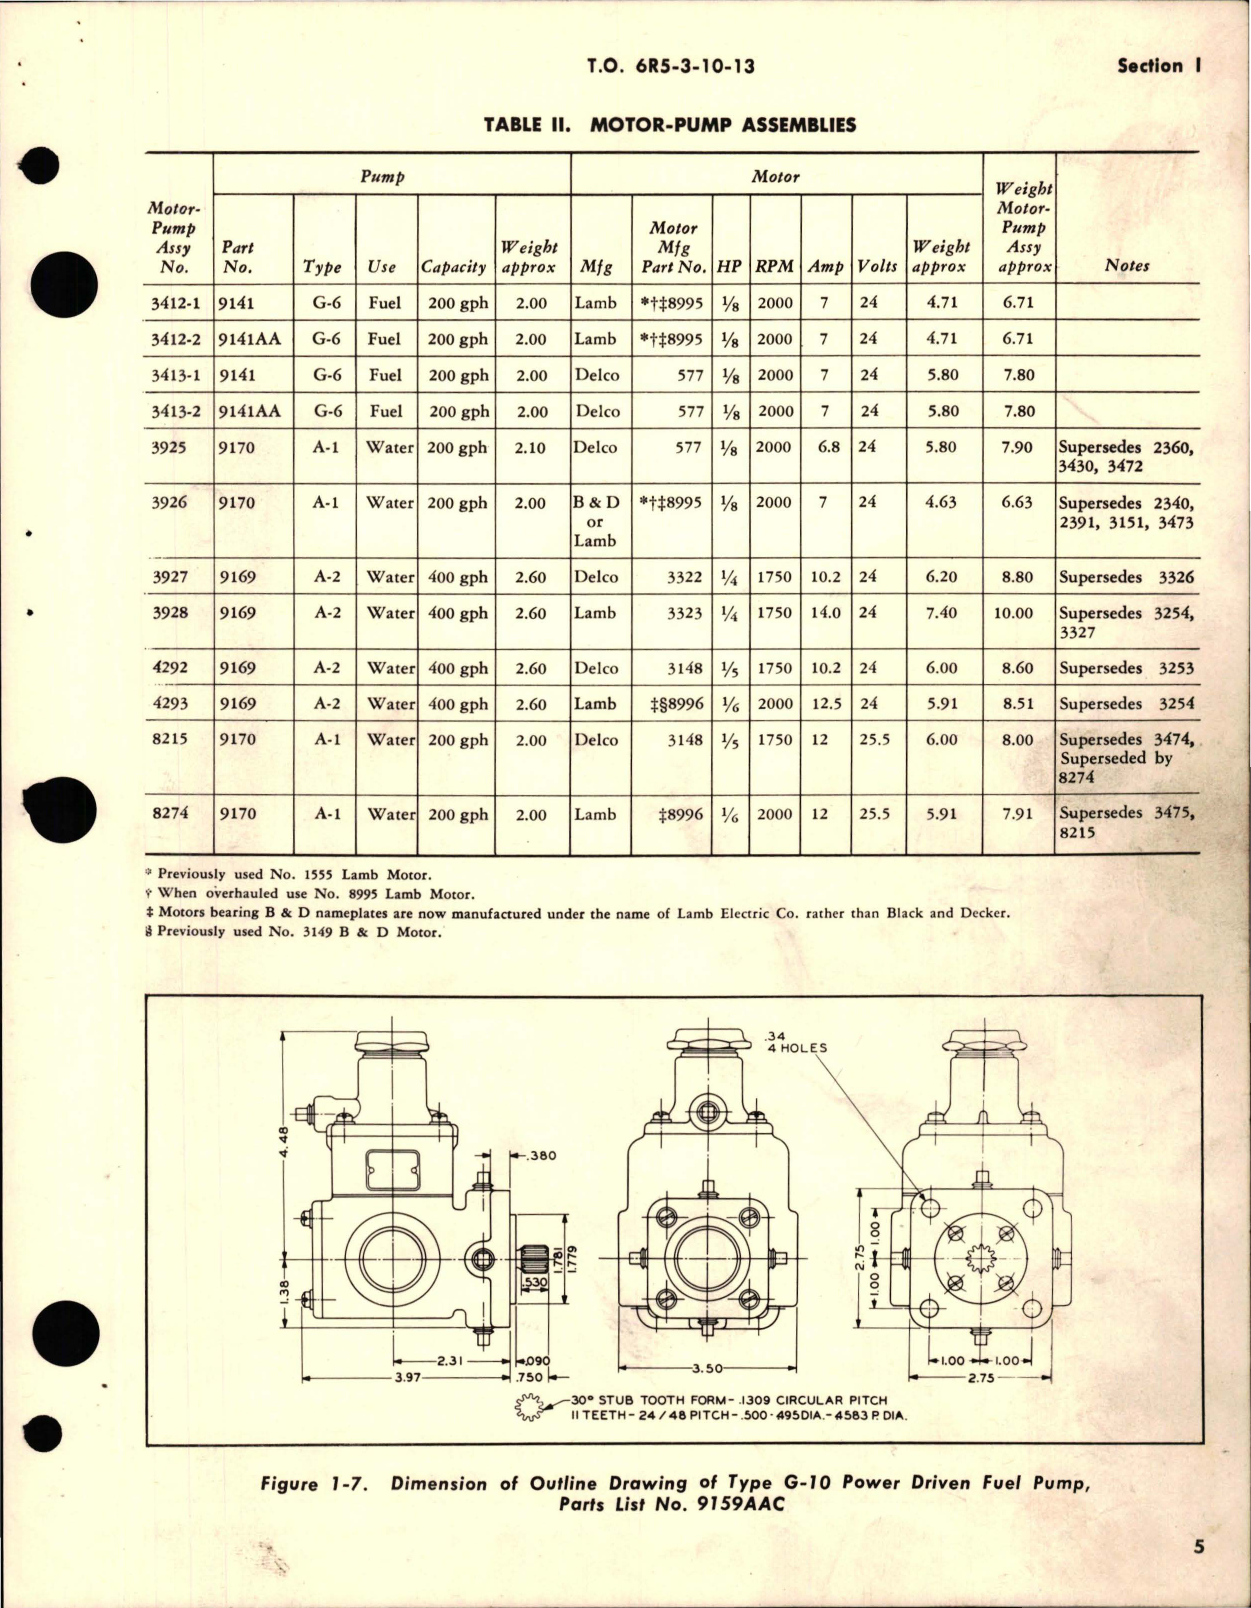 Sample page 9 from AirCorps Library document: Overhaul Instructions for Fuel and Water Pumps - Types A-1, A-2, F-10, G-6, G-9, and G-10